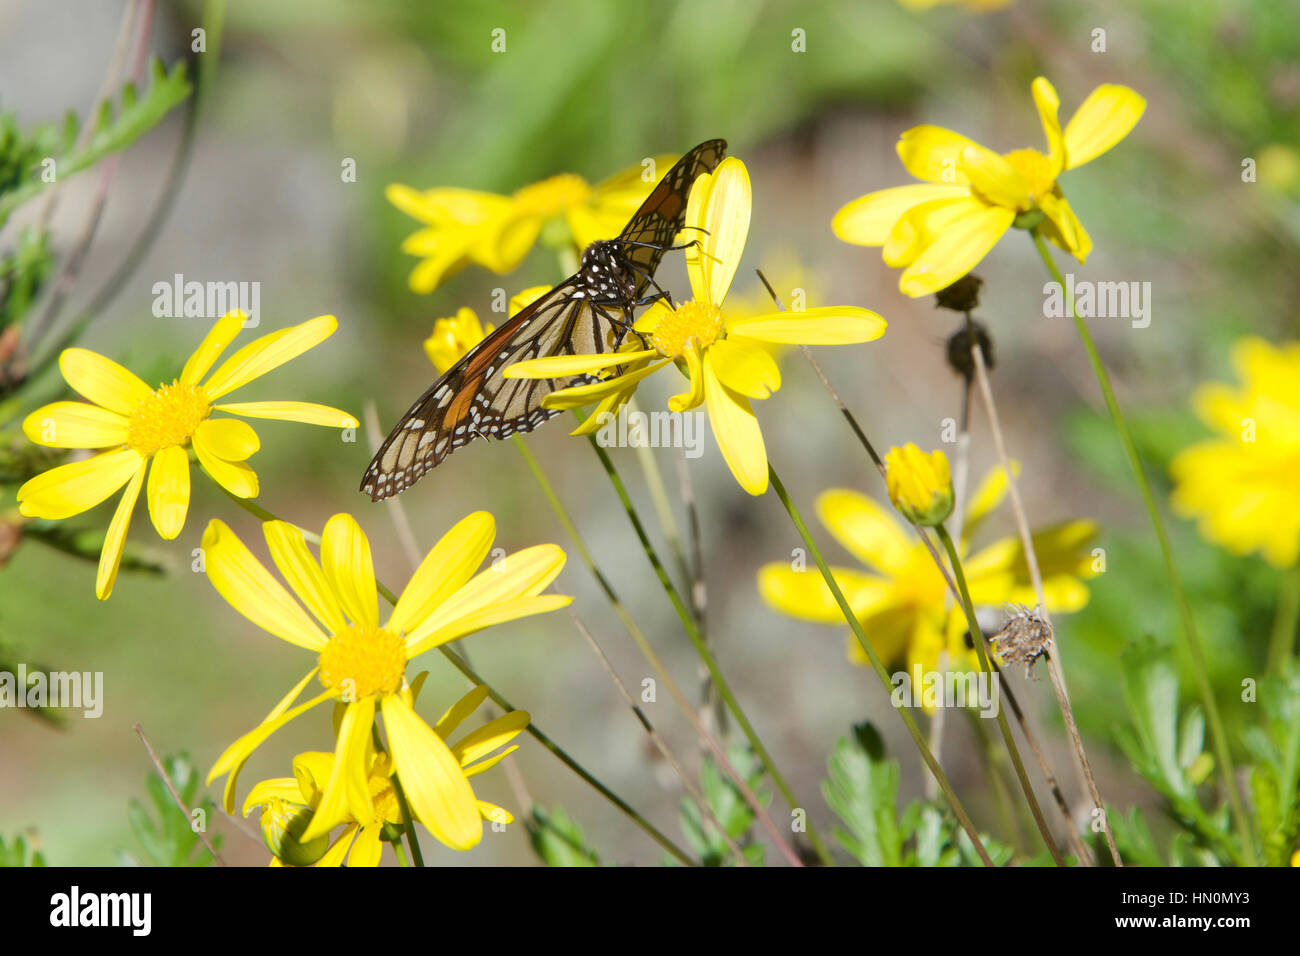 Monarch butterfly on yellow daisy flowers Stock Photo